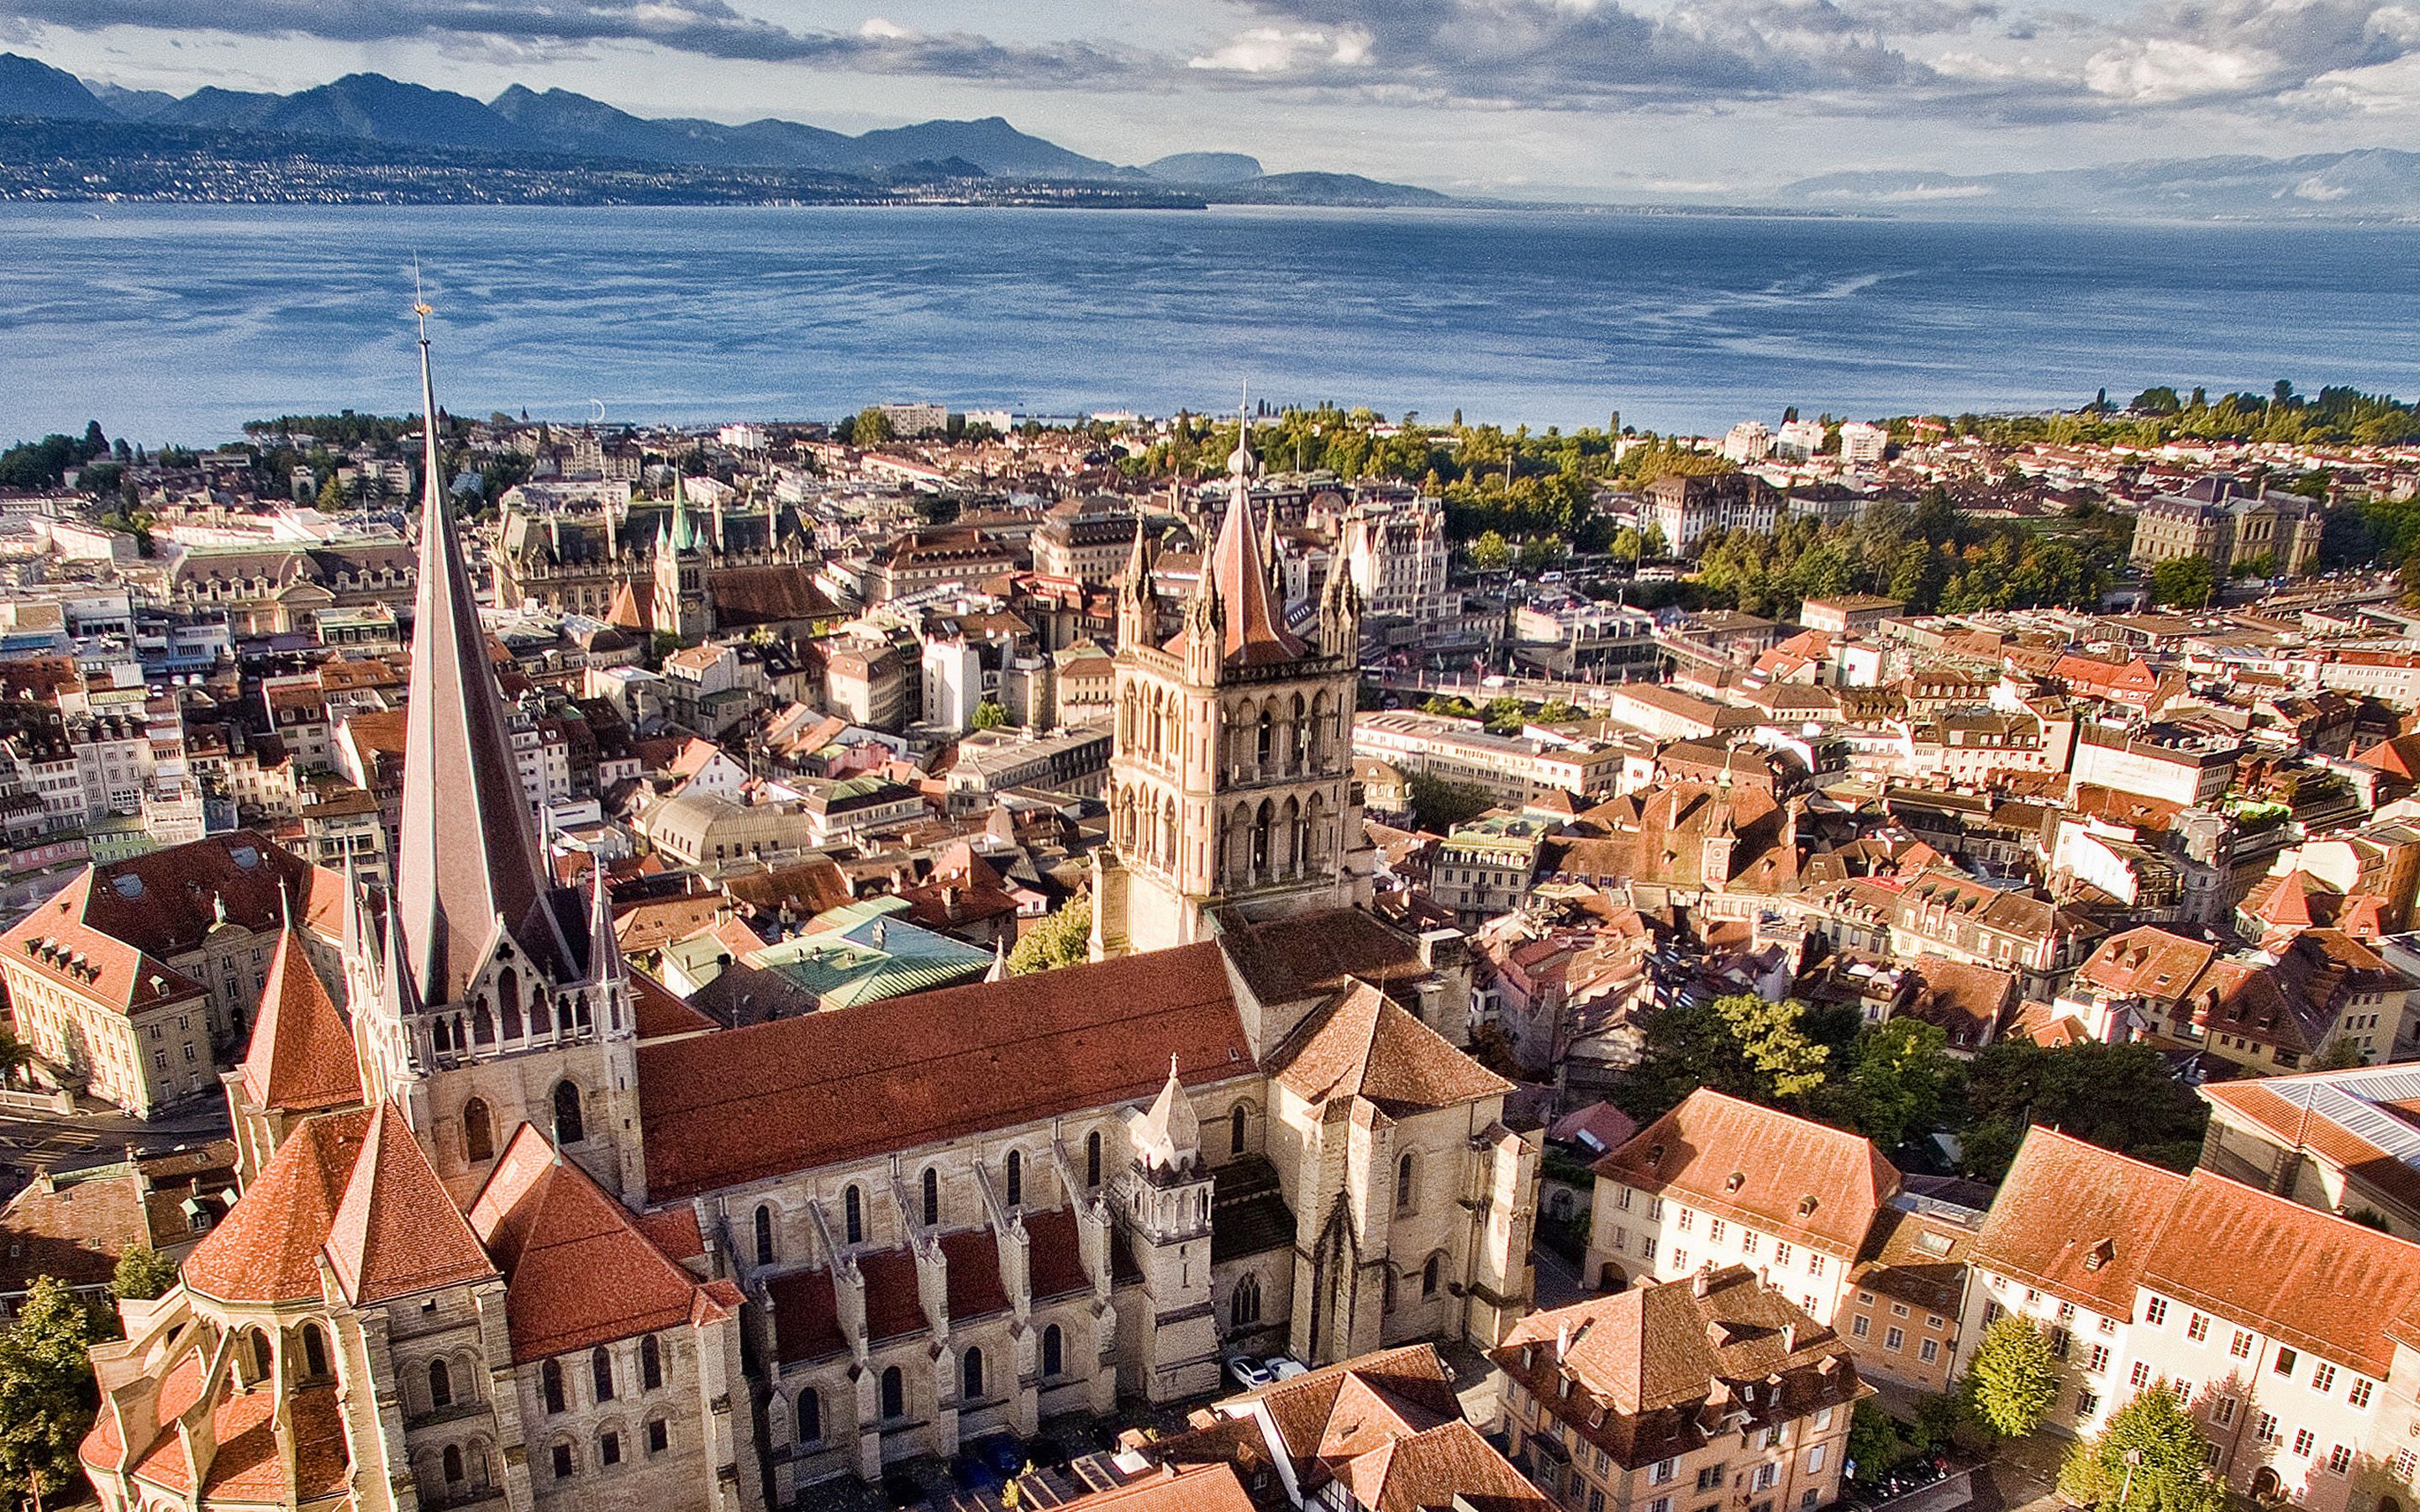 Download wallpaper Lausanne, cityscapes, summer, swiss cities, Lake Geneva, Switzerland, Europe for desktop with resolution 2880x1800. High Quality HD picture wallpaper